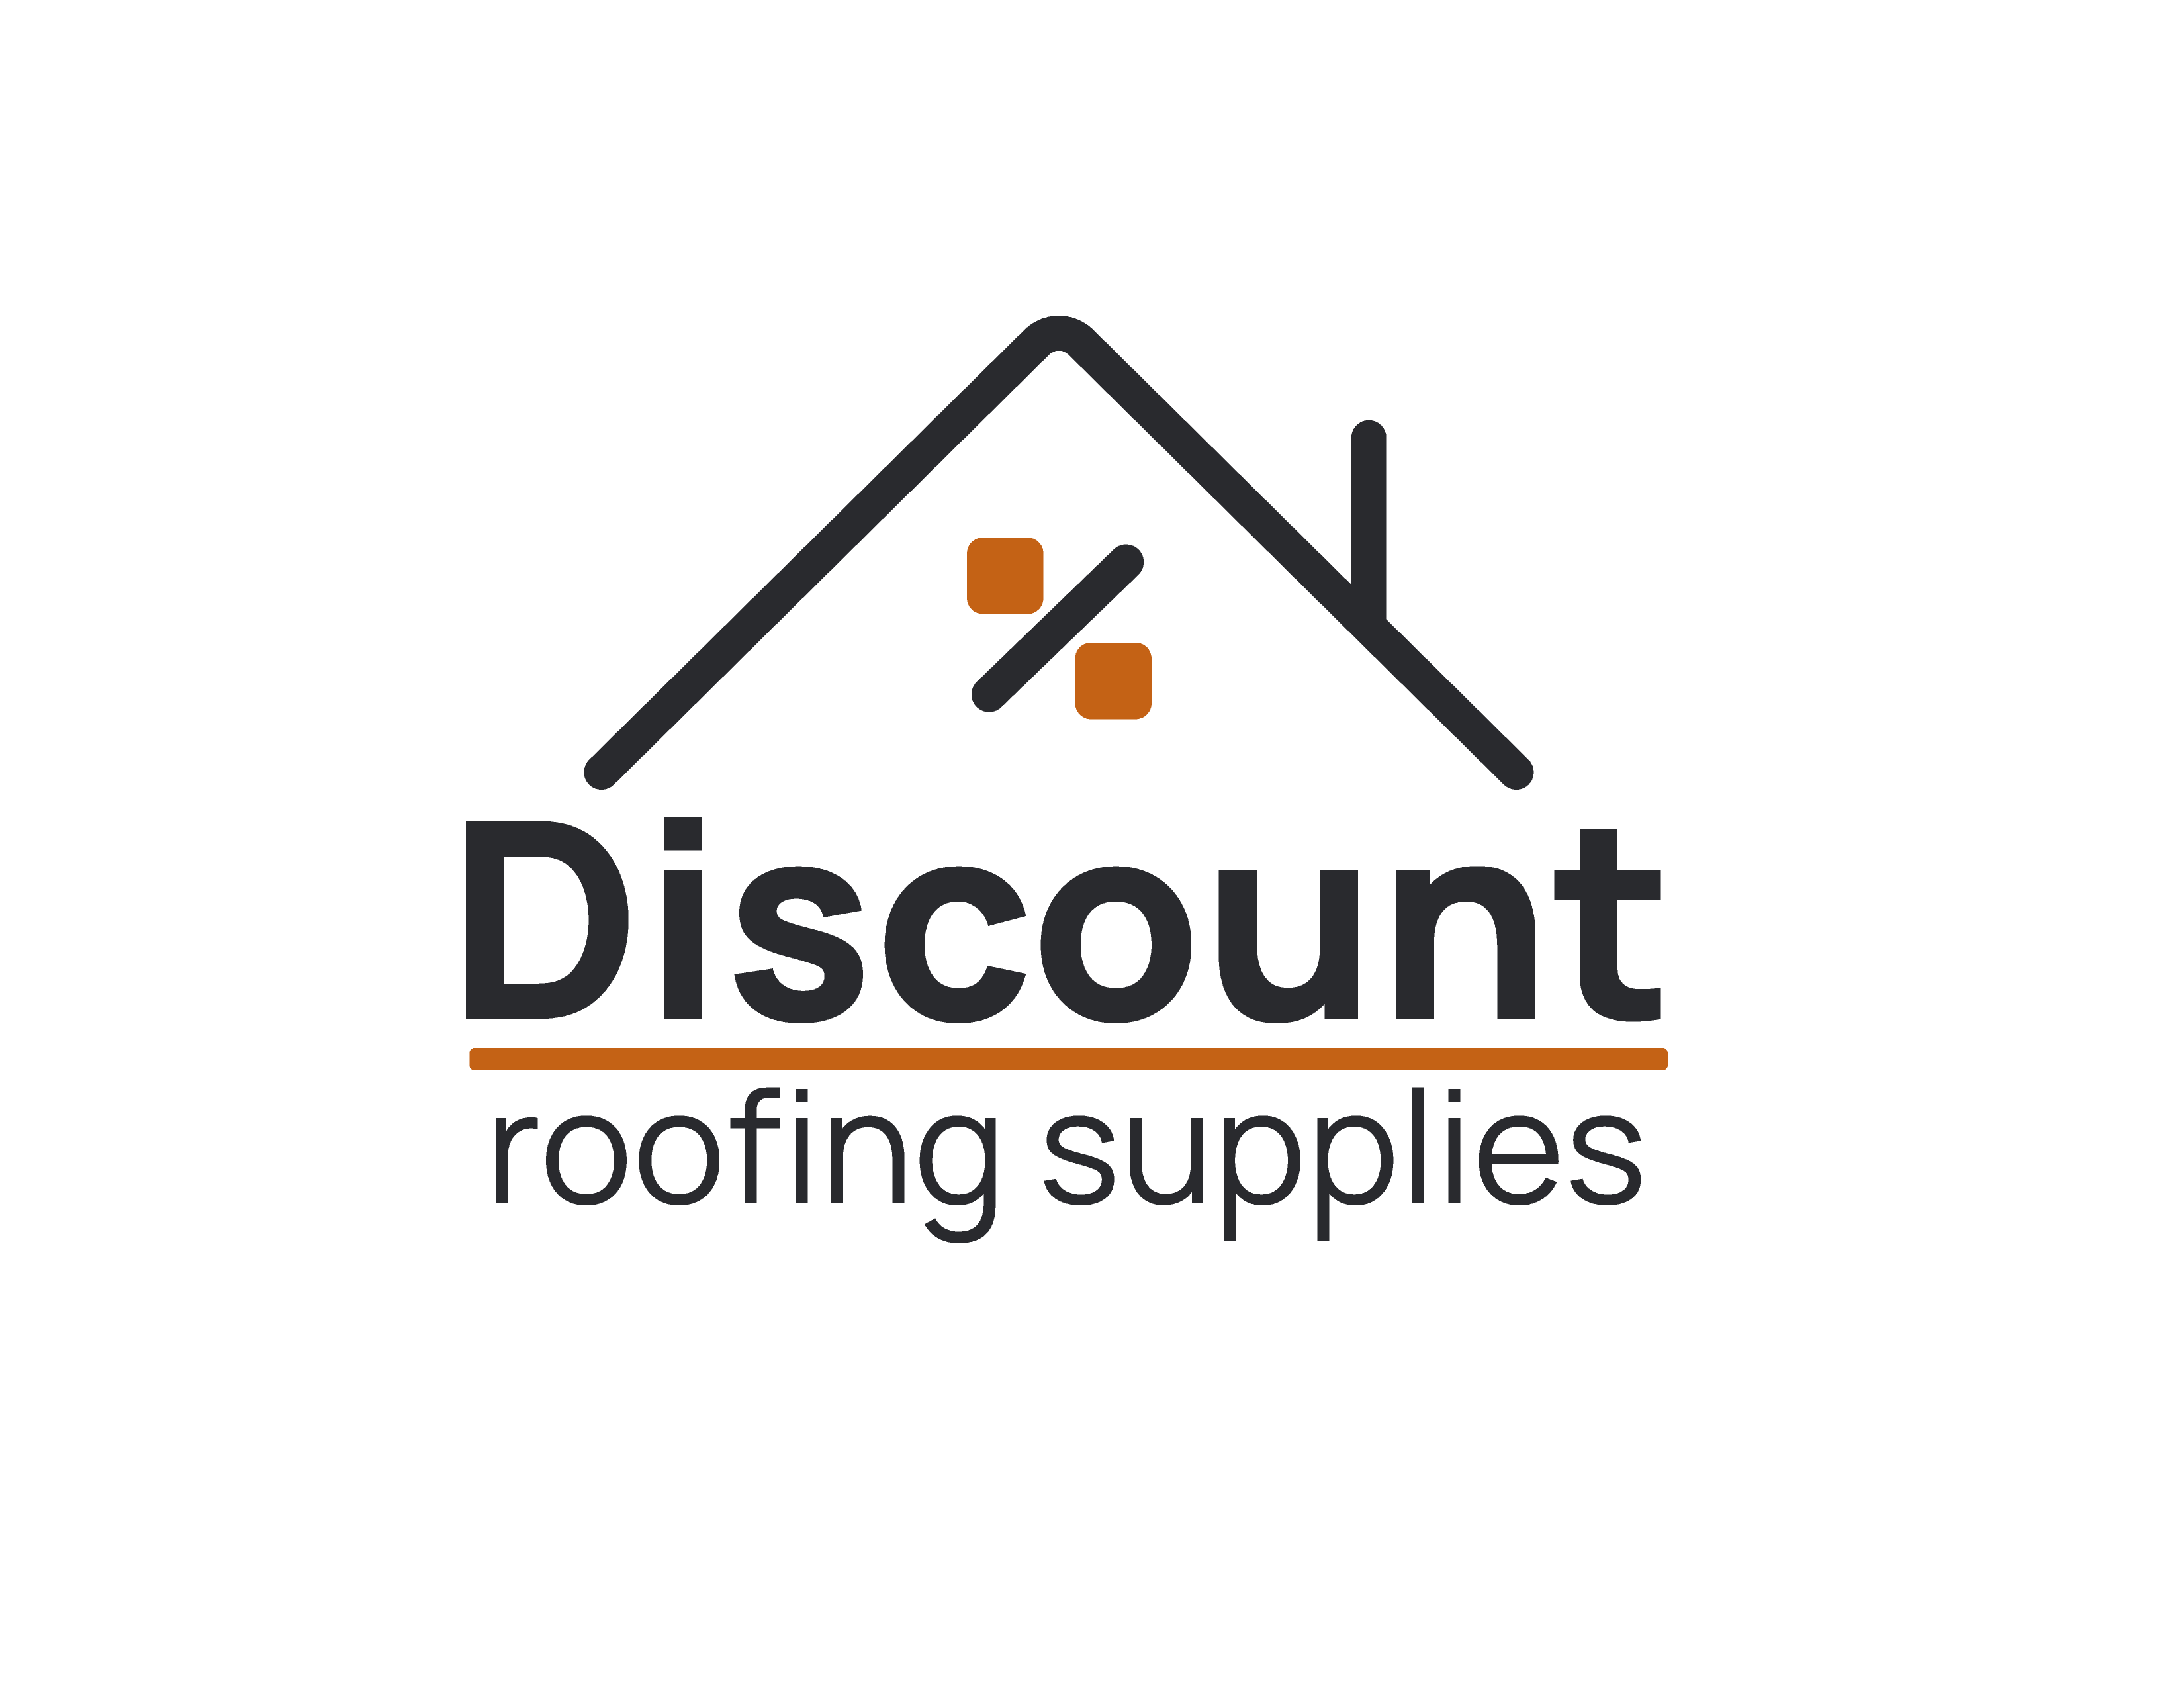 Discount Roofing Supplies